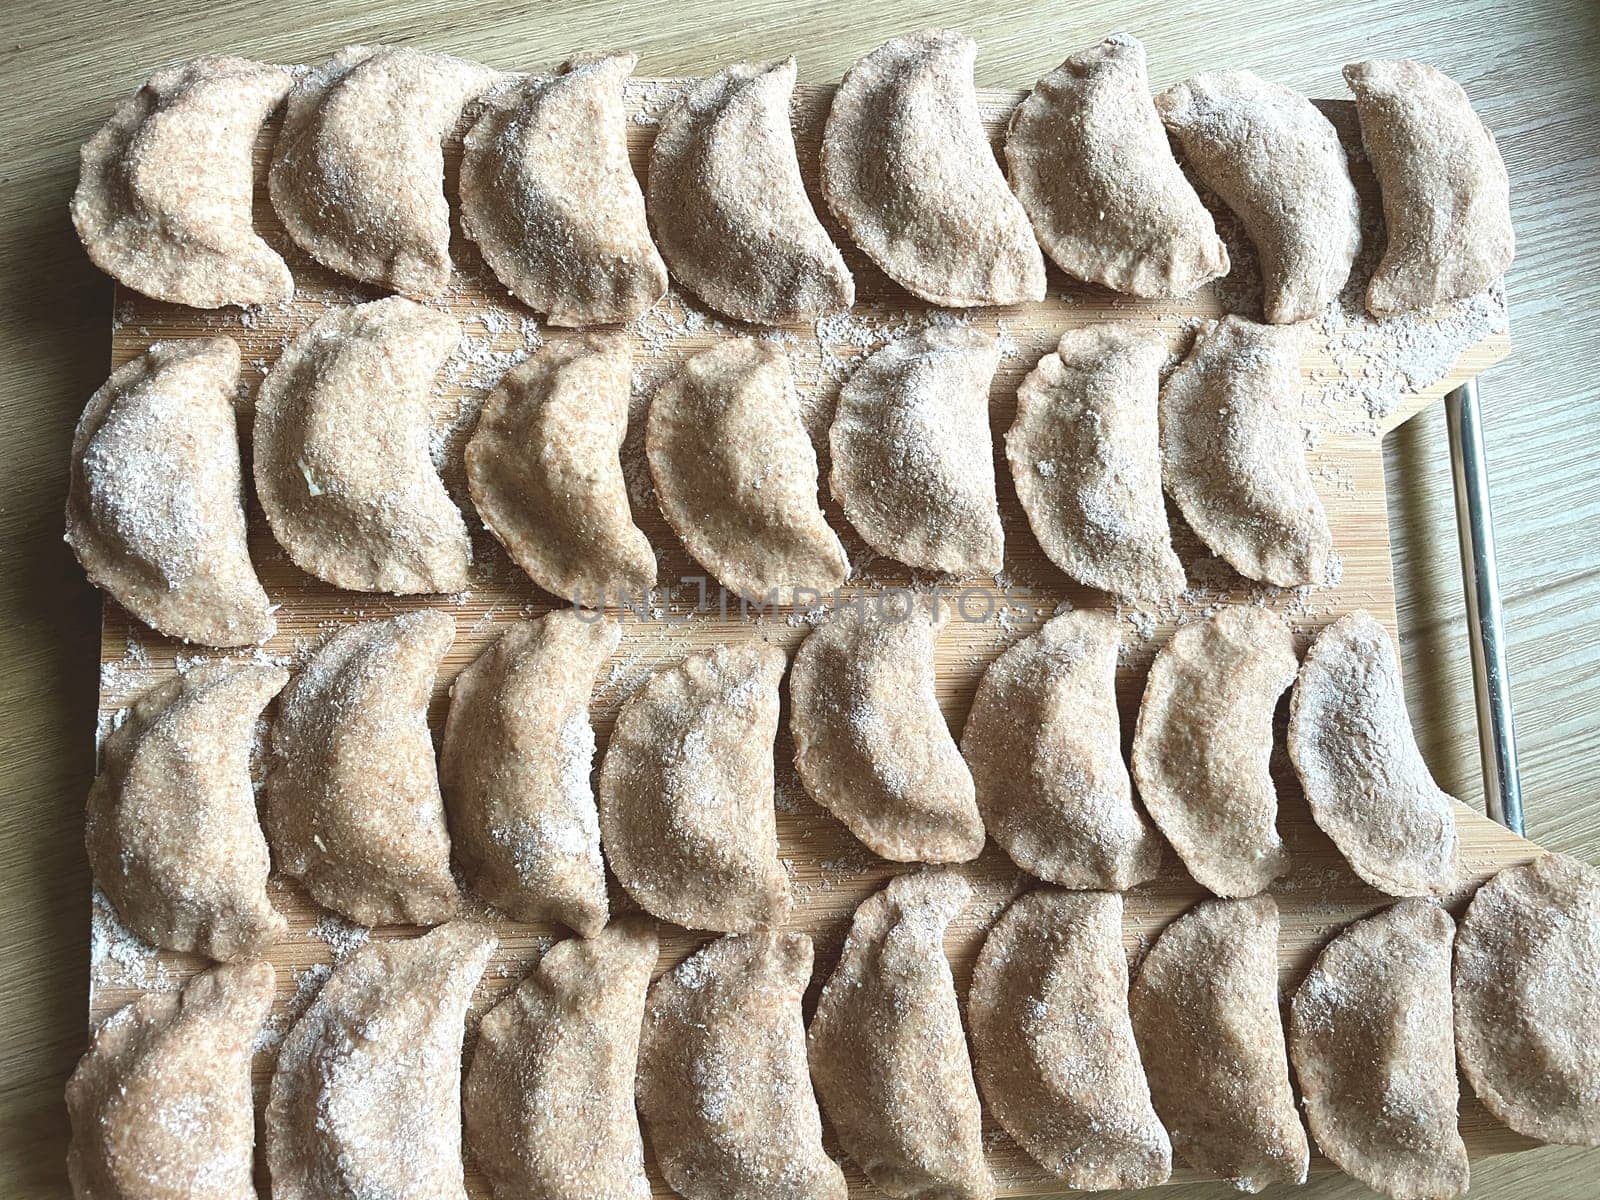 Dumplings made of whole wheat flour are molded on the kitchen board. High quality photo